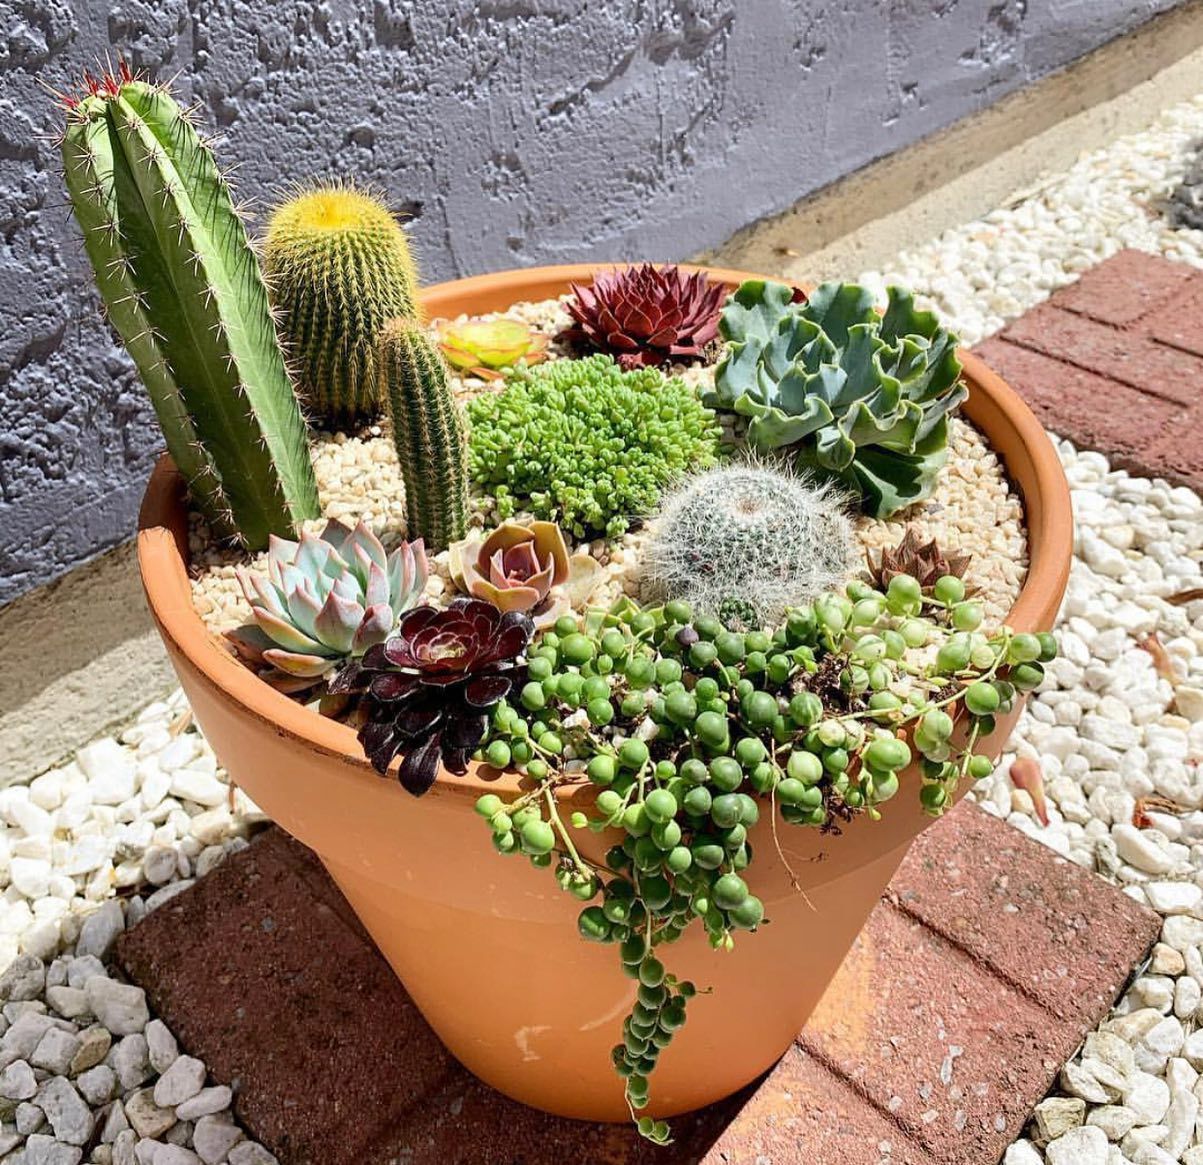 Pot with various types of cactus and plants